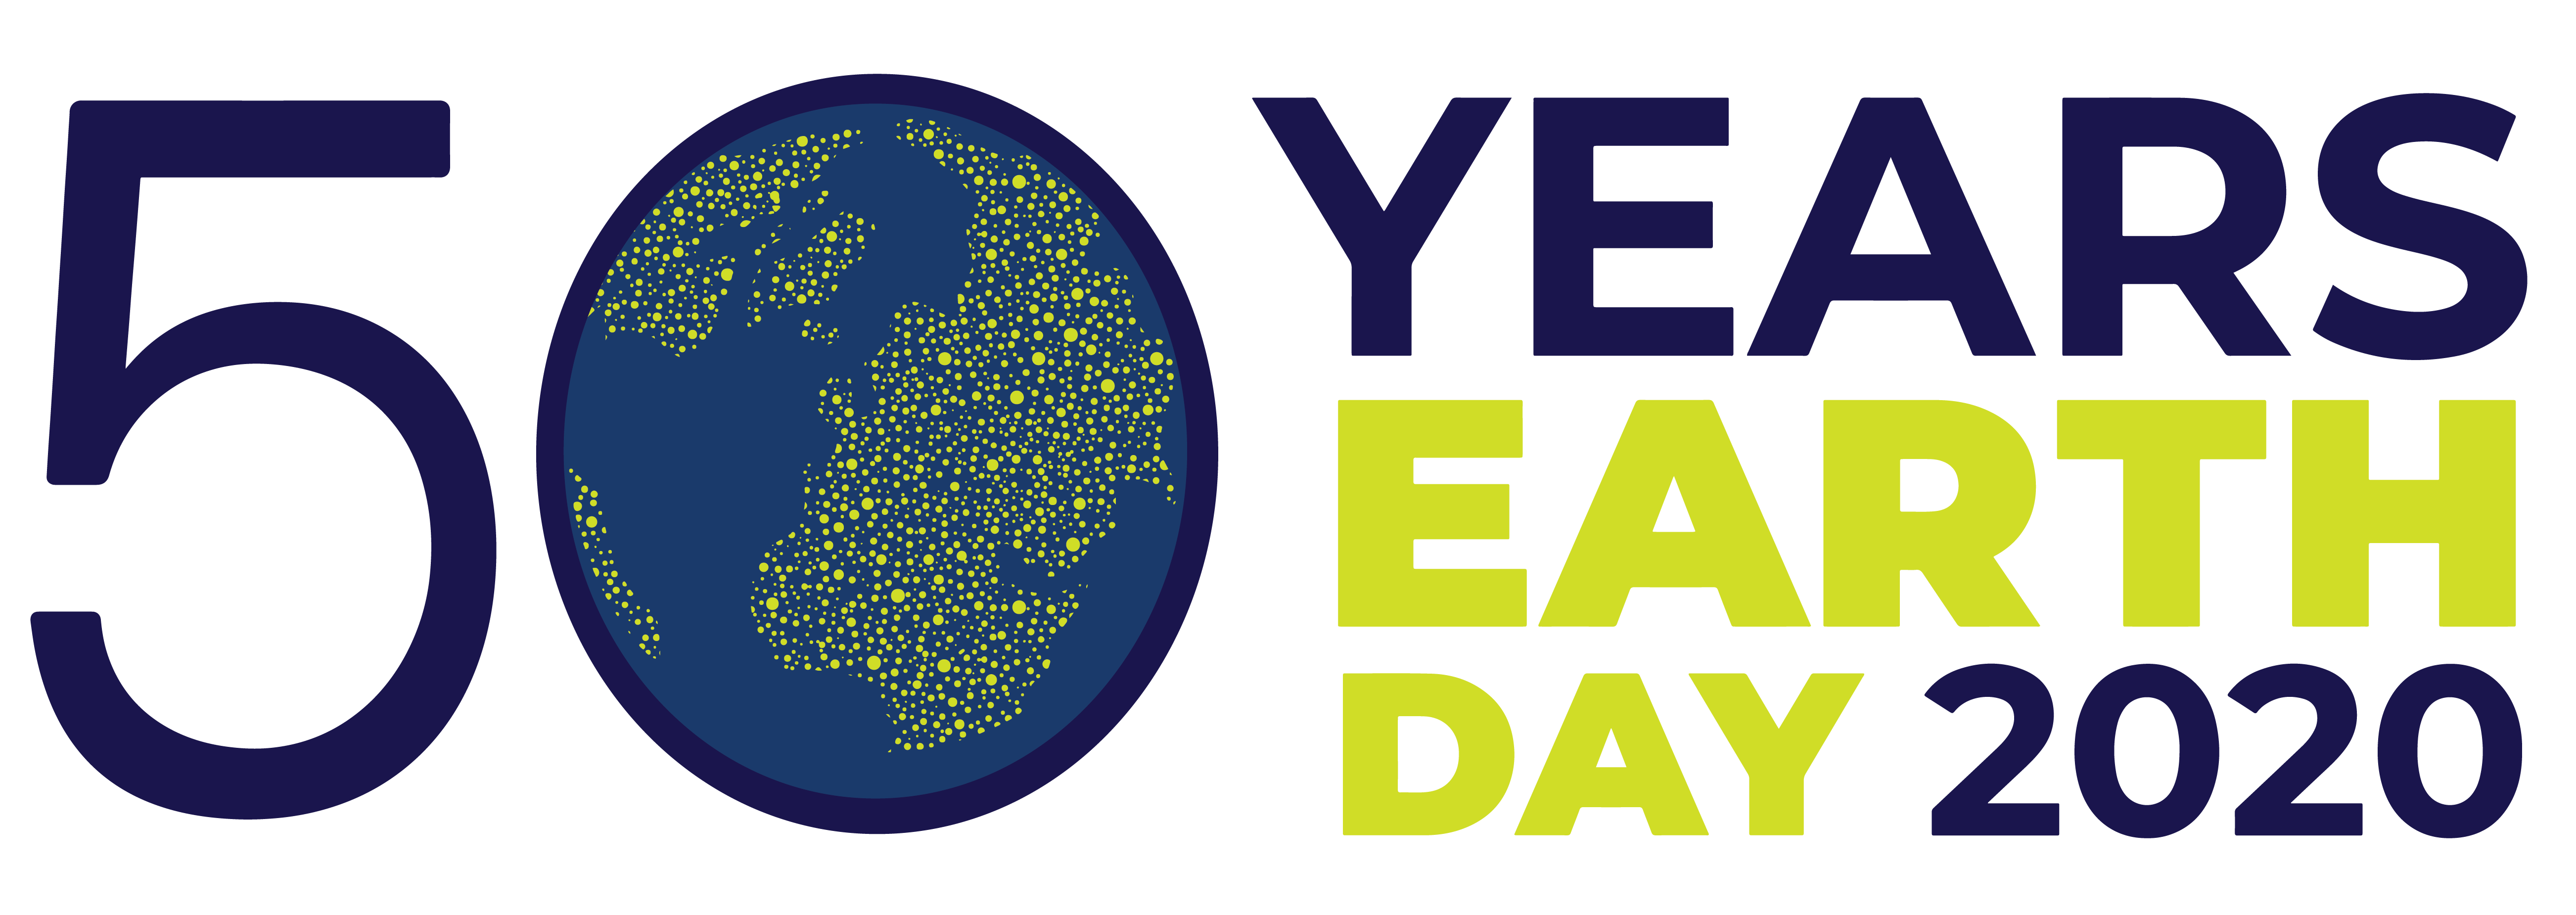 Earth Day Network 50th Year Earth Day